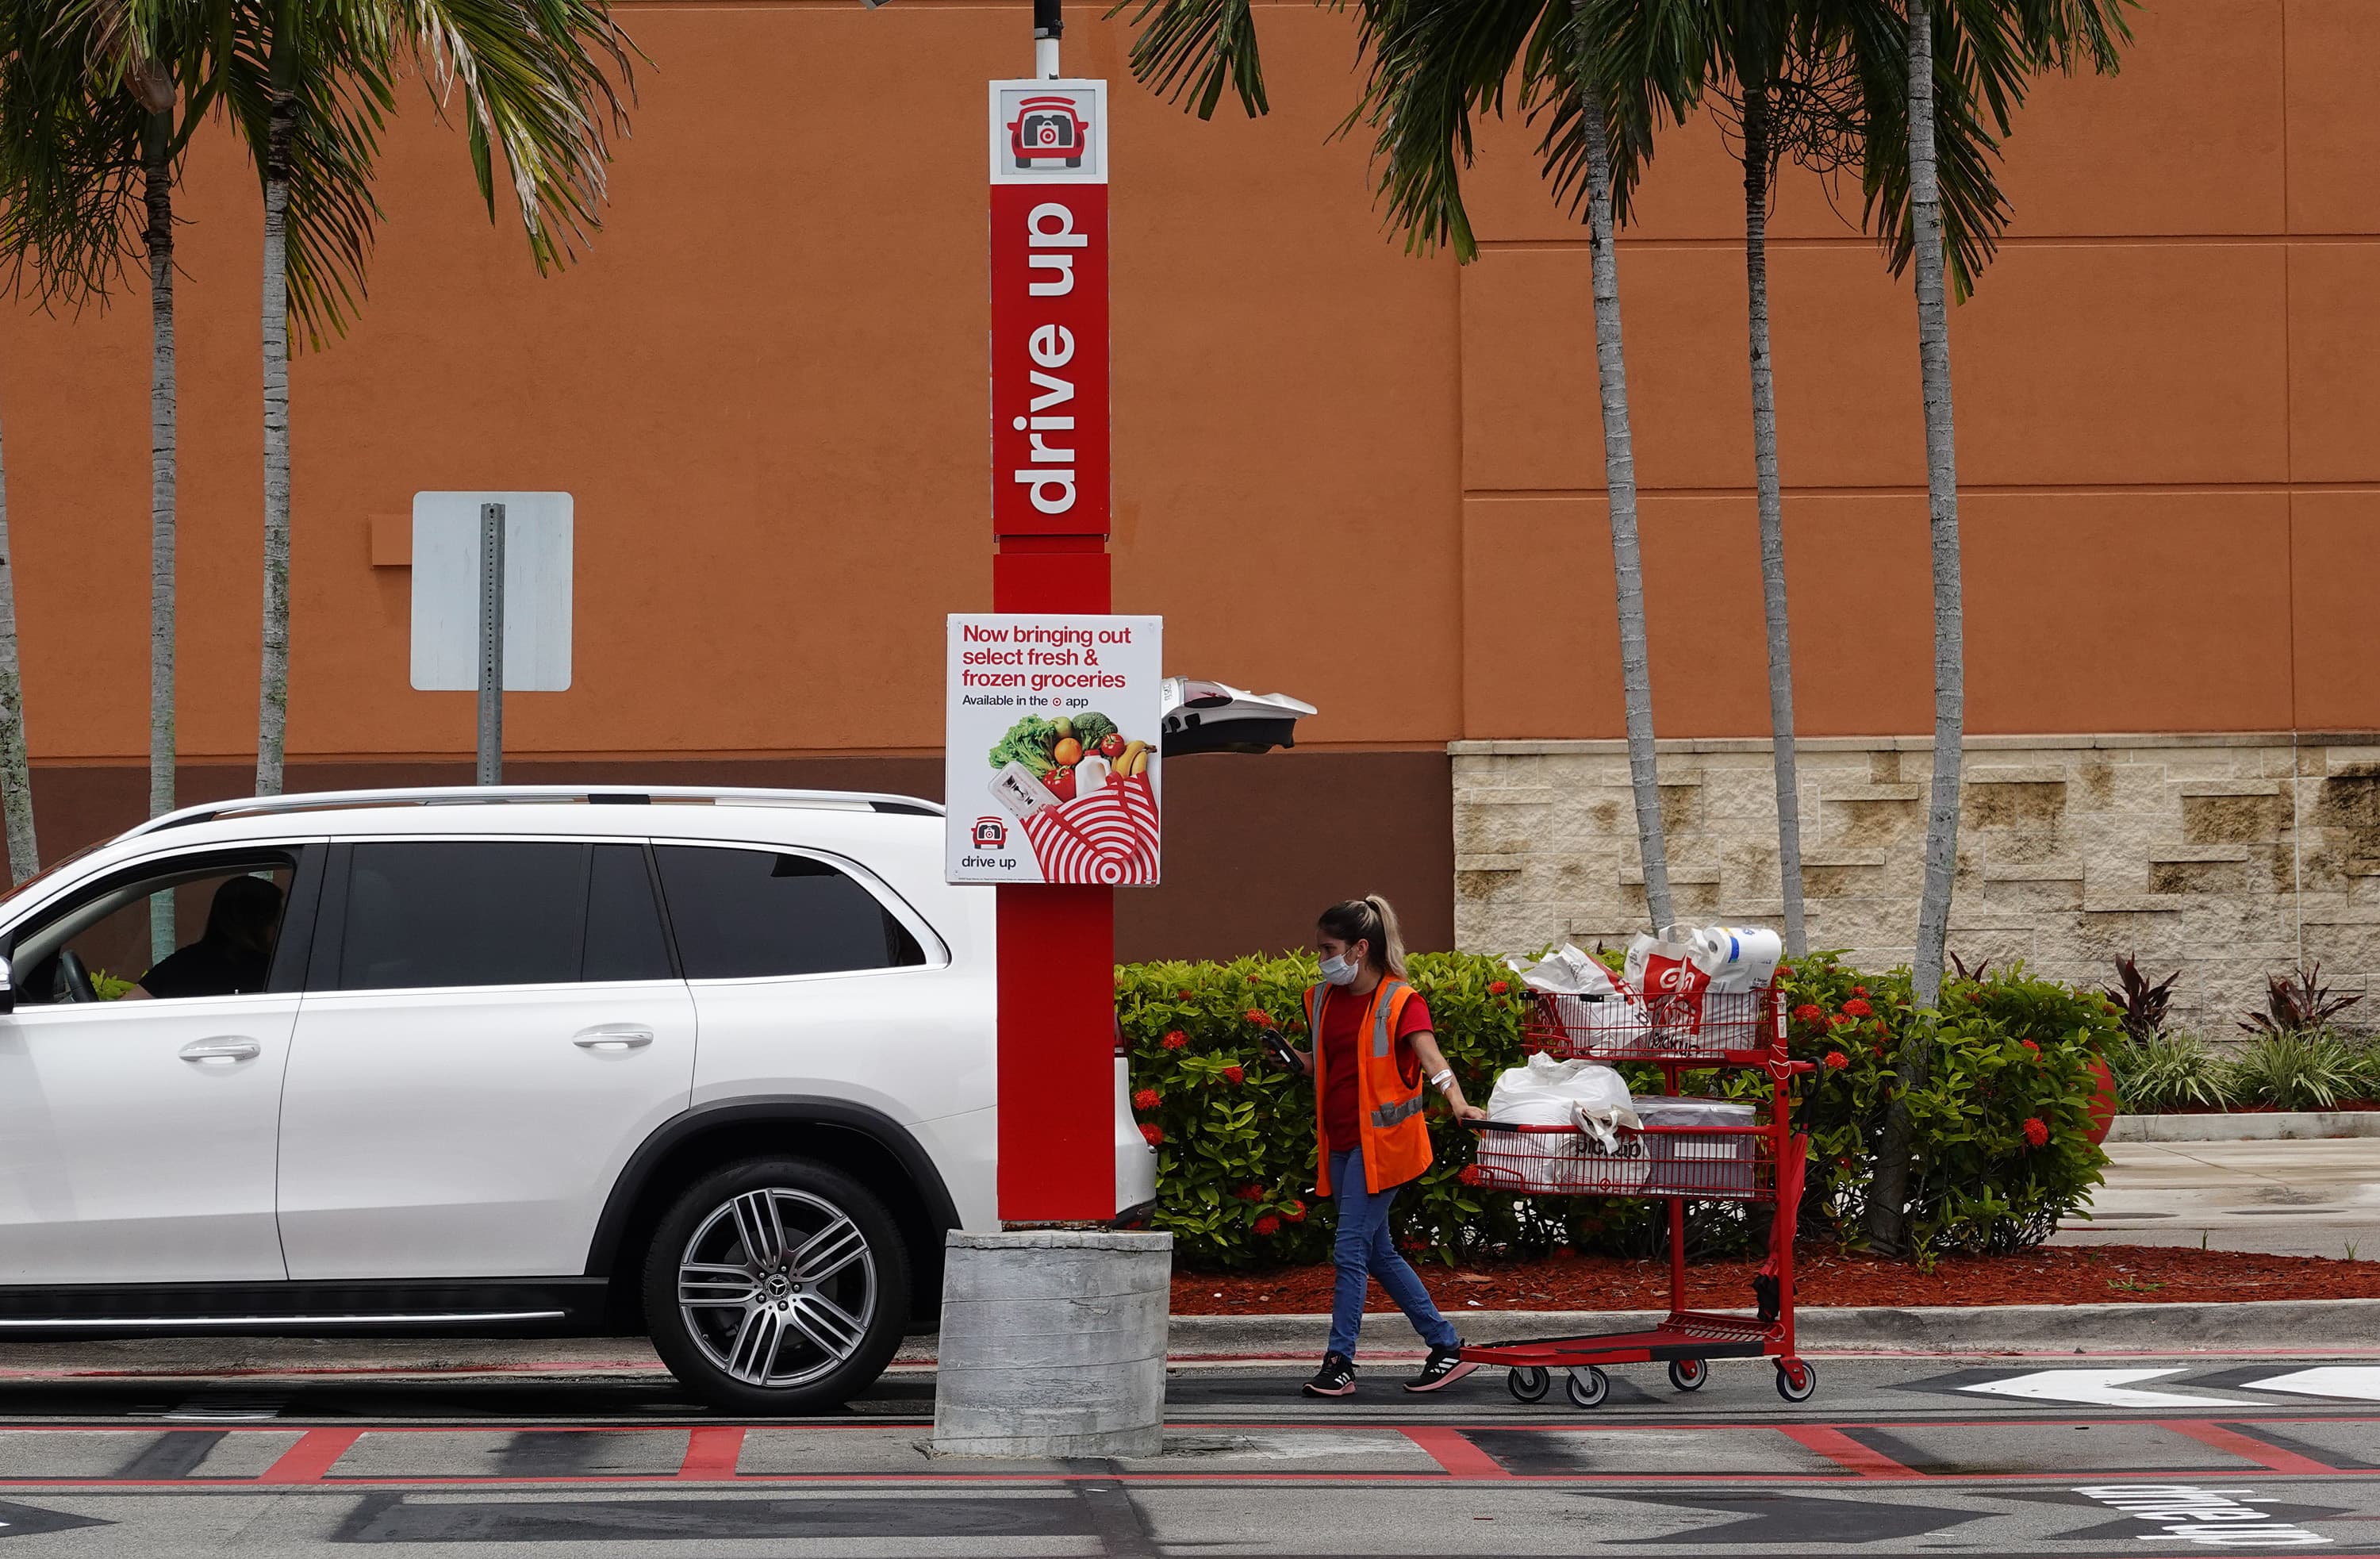 Target to test Starbucks order pickup returns from the parking lot – CNBC